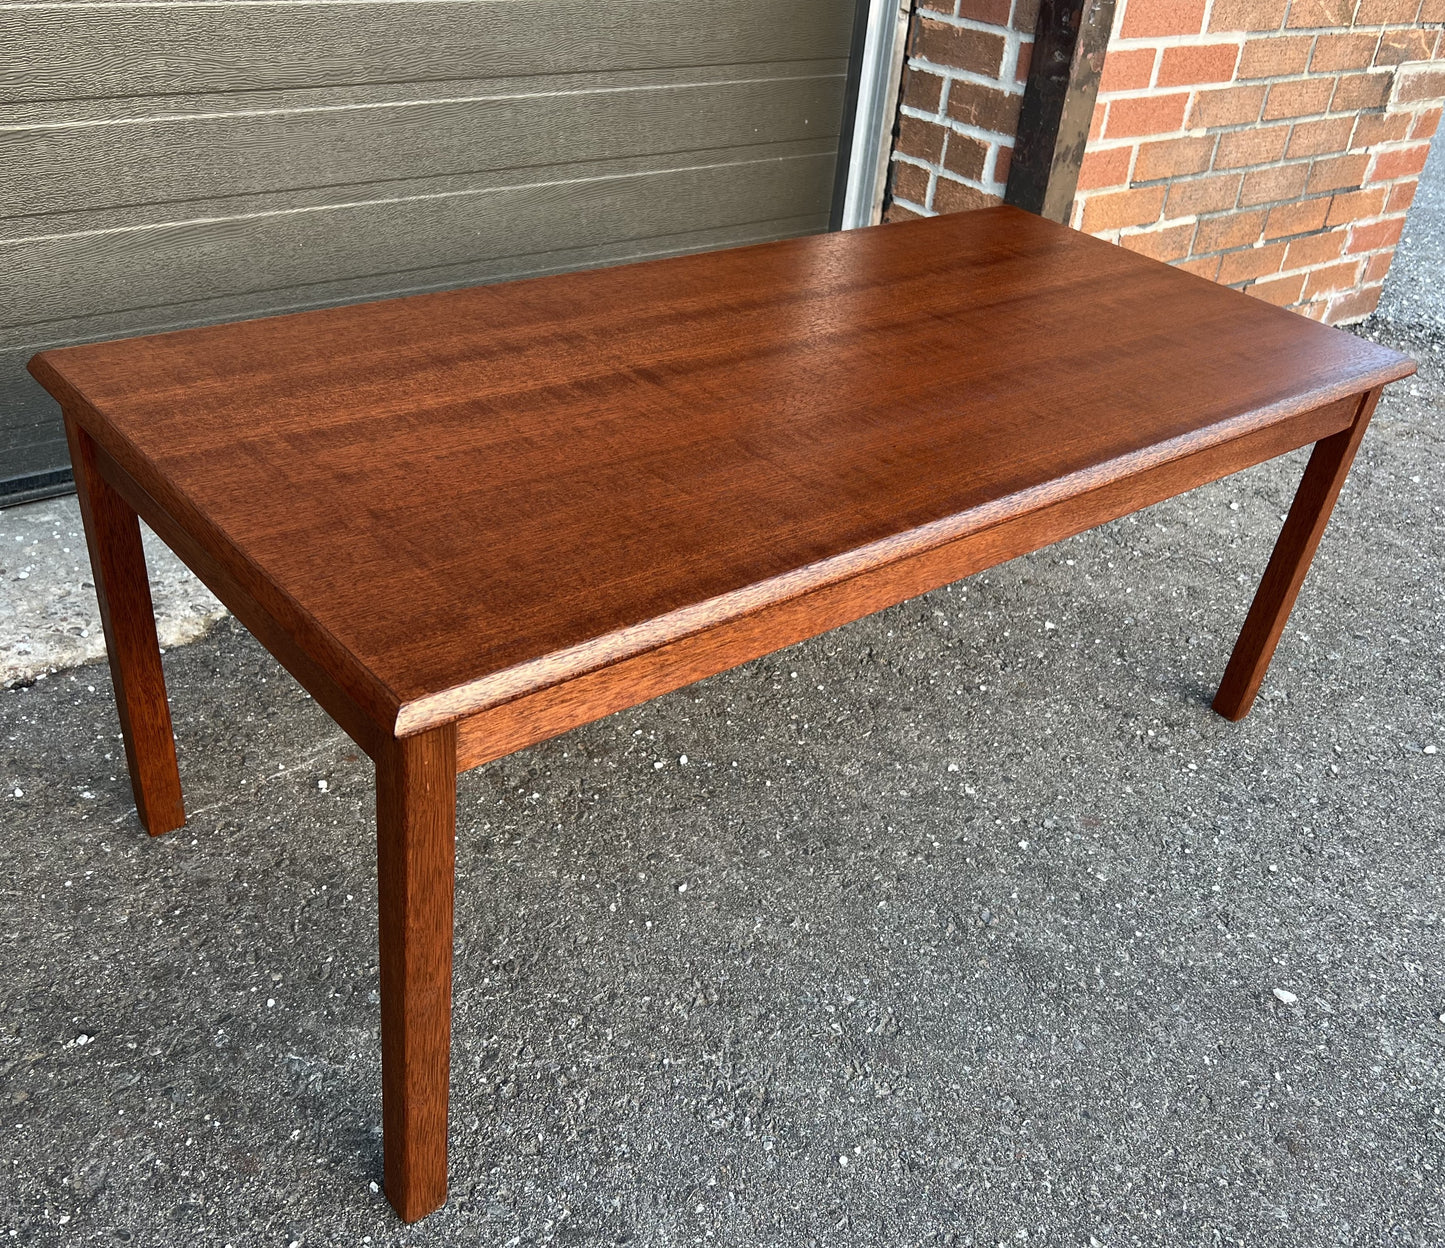 REFINISHED Danish Mid Century Modern coffee table & 2 end tables